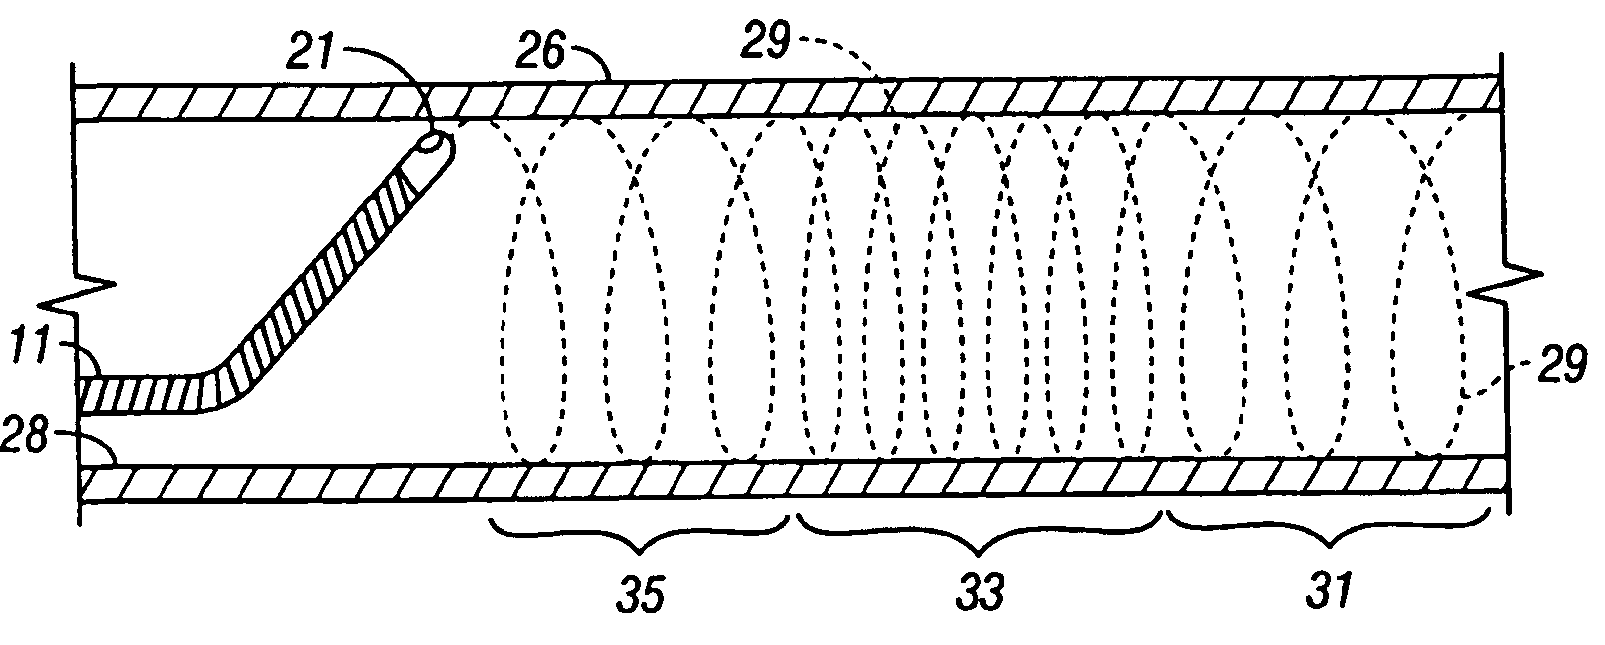 Device for sensing parameters of a hollow body organ